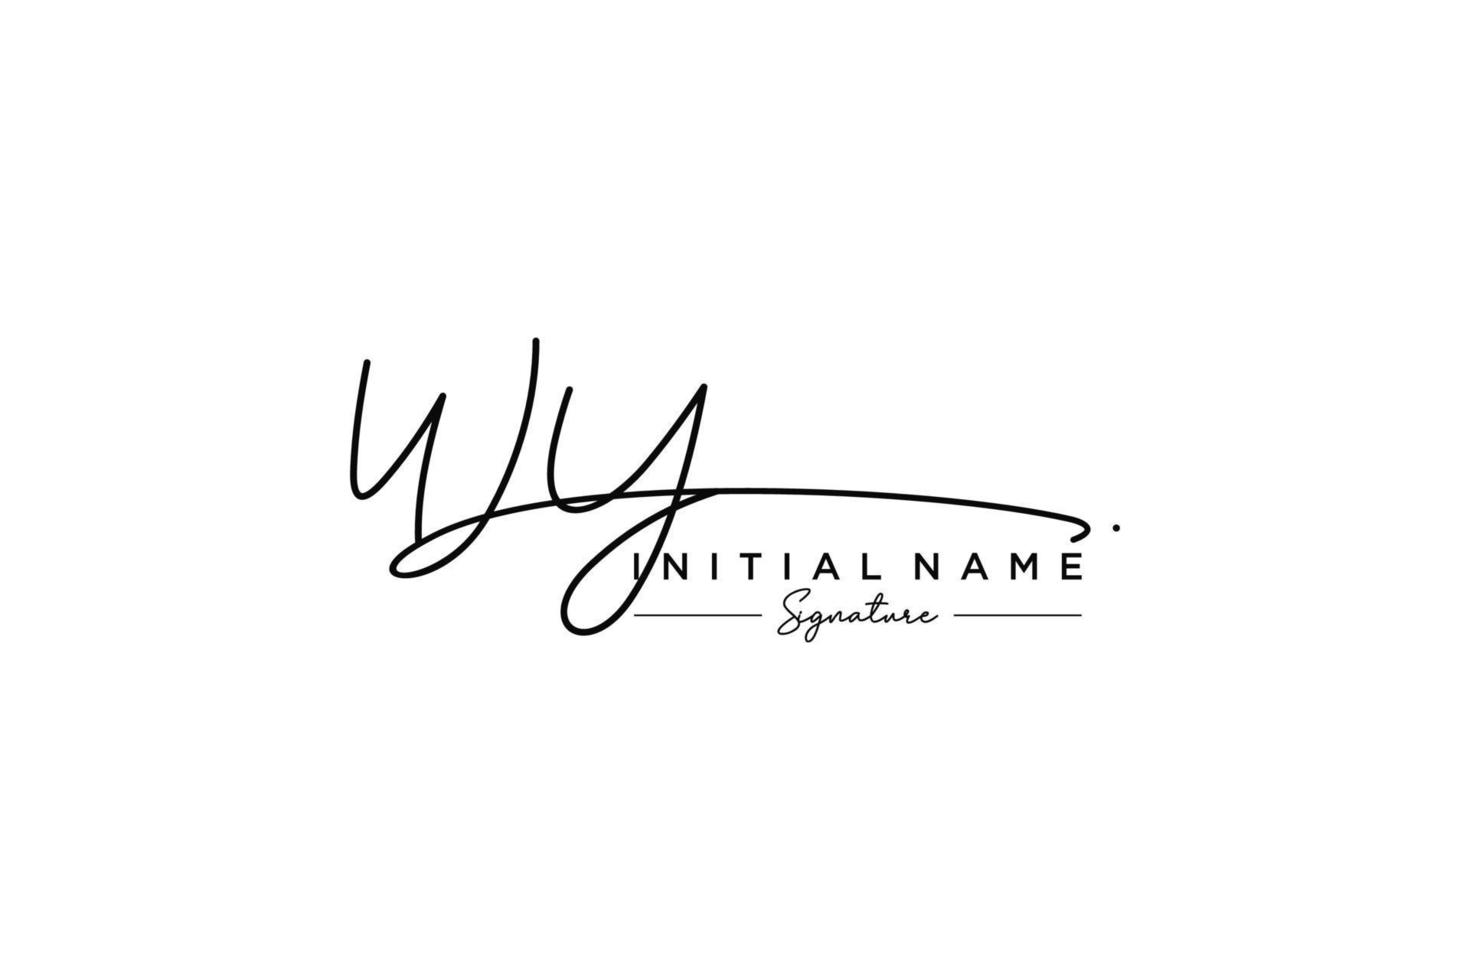 Initial WY signature logo template vector. Hand drawn Calligraphy lettering Vector illustration.